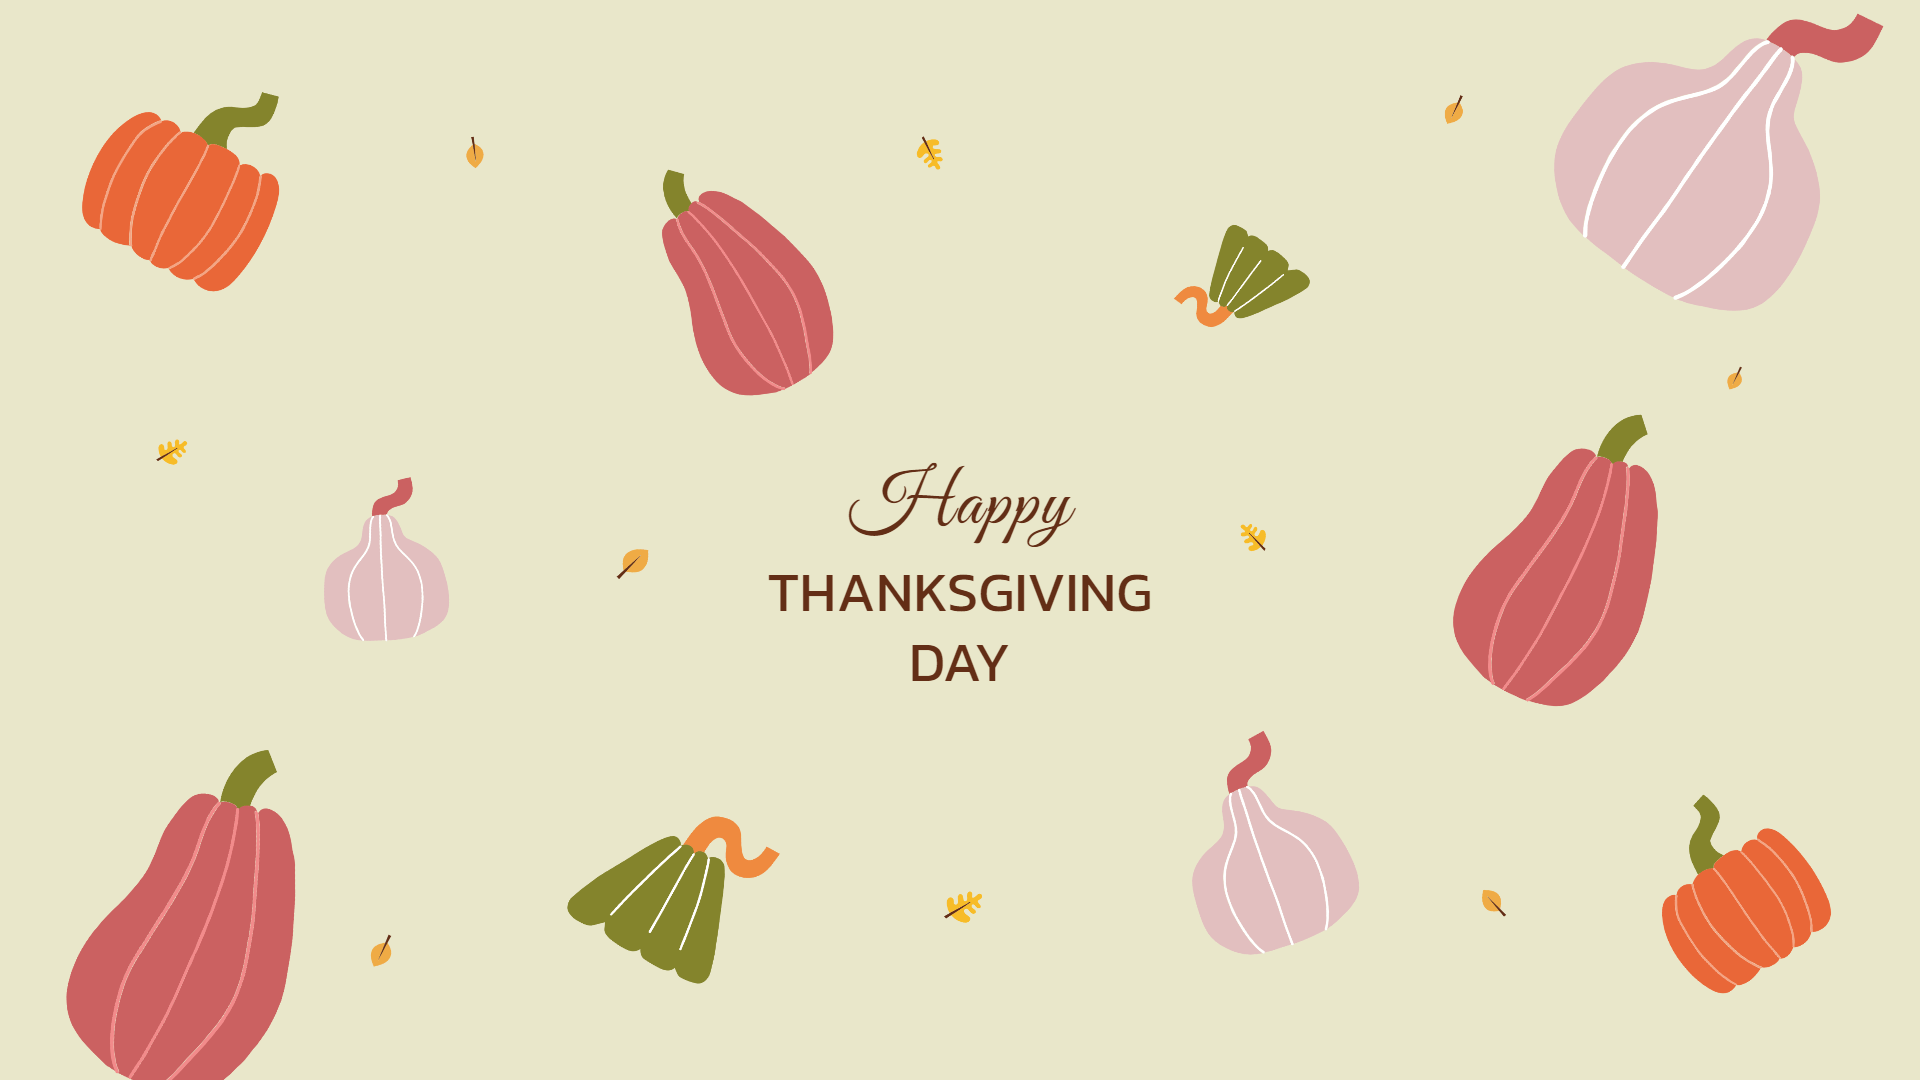 Thanksgiving Wallpaper & Background for Your Holiday Celebration 2022